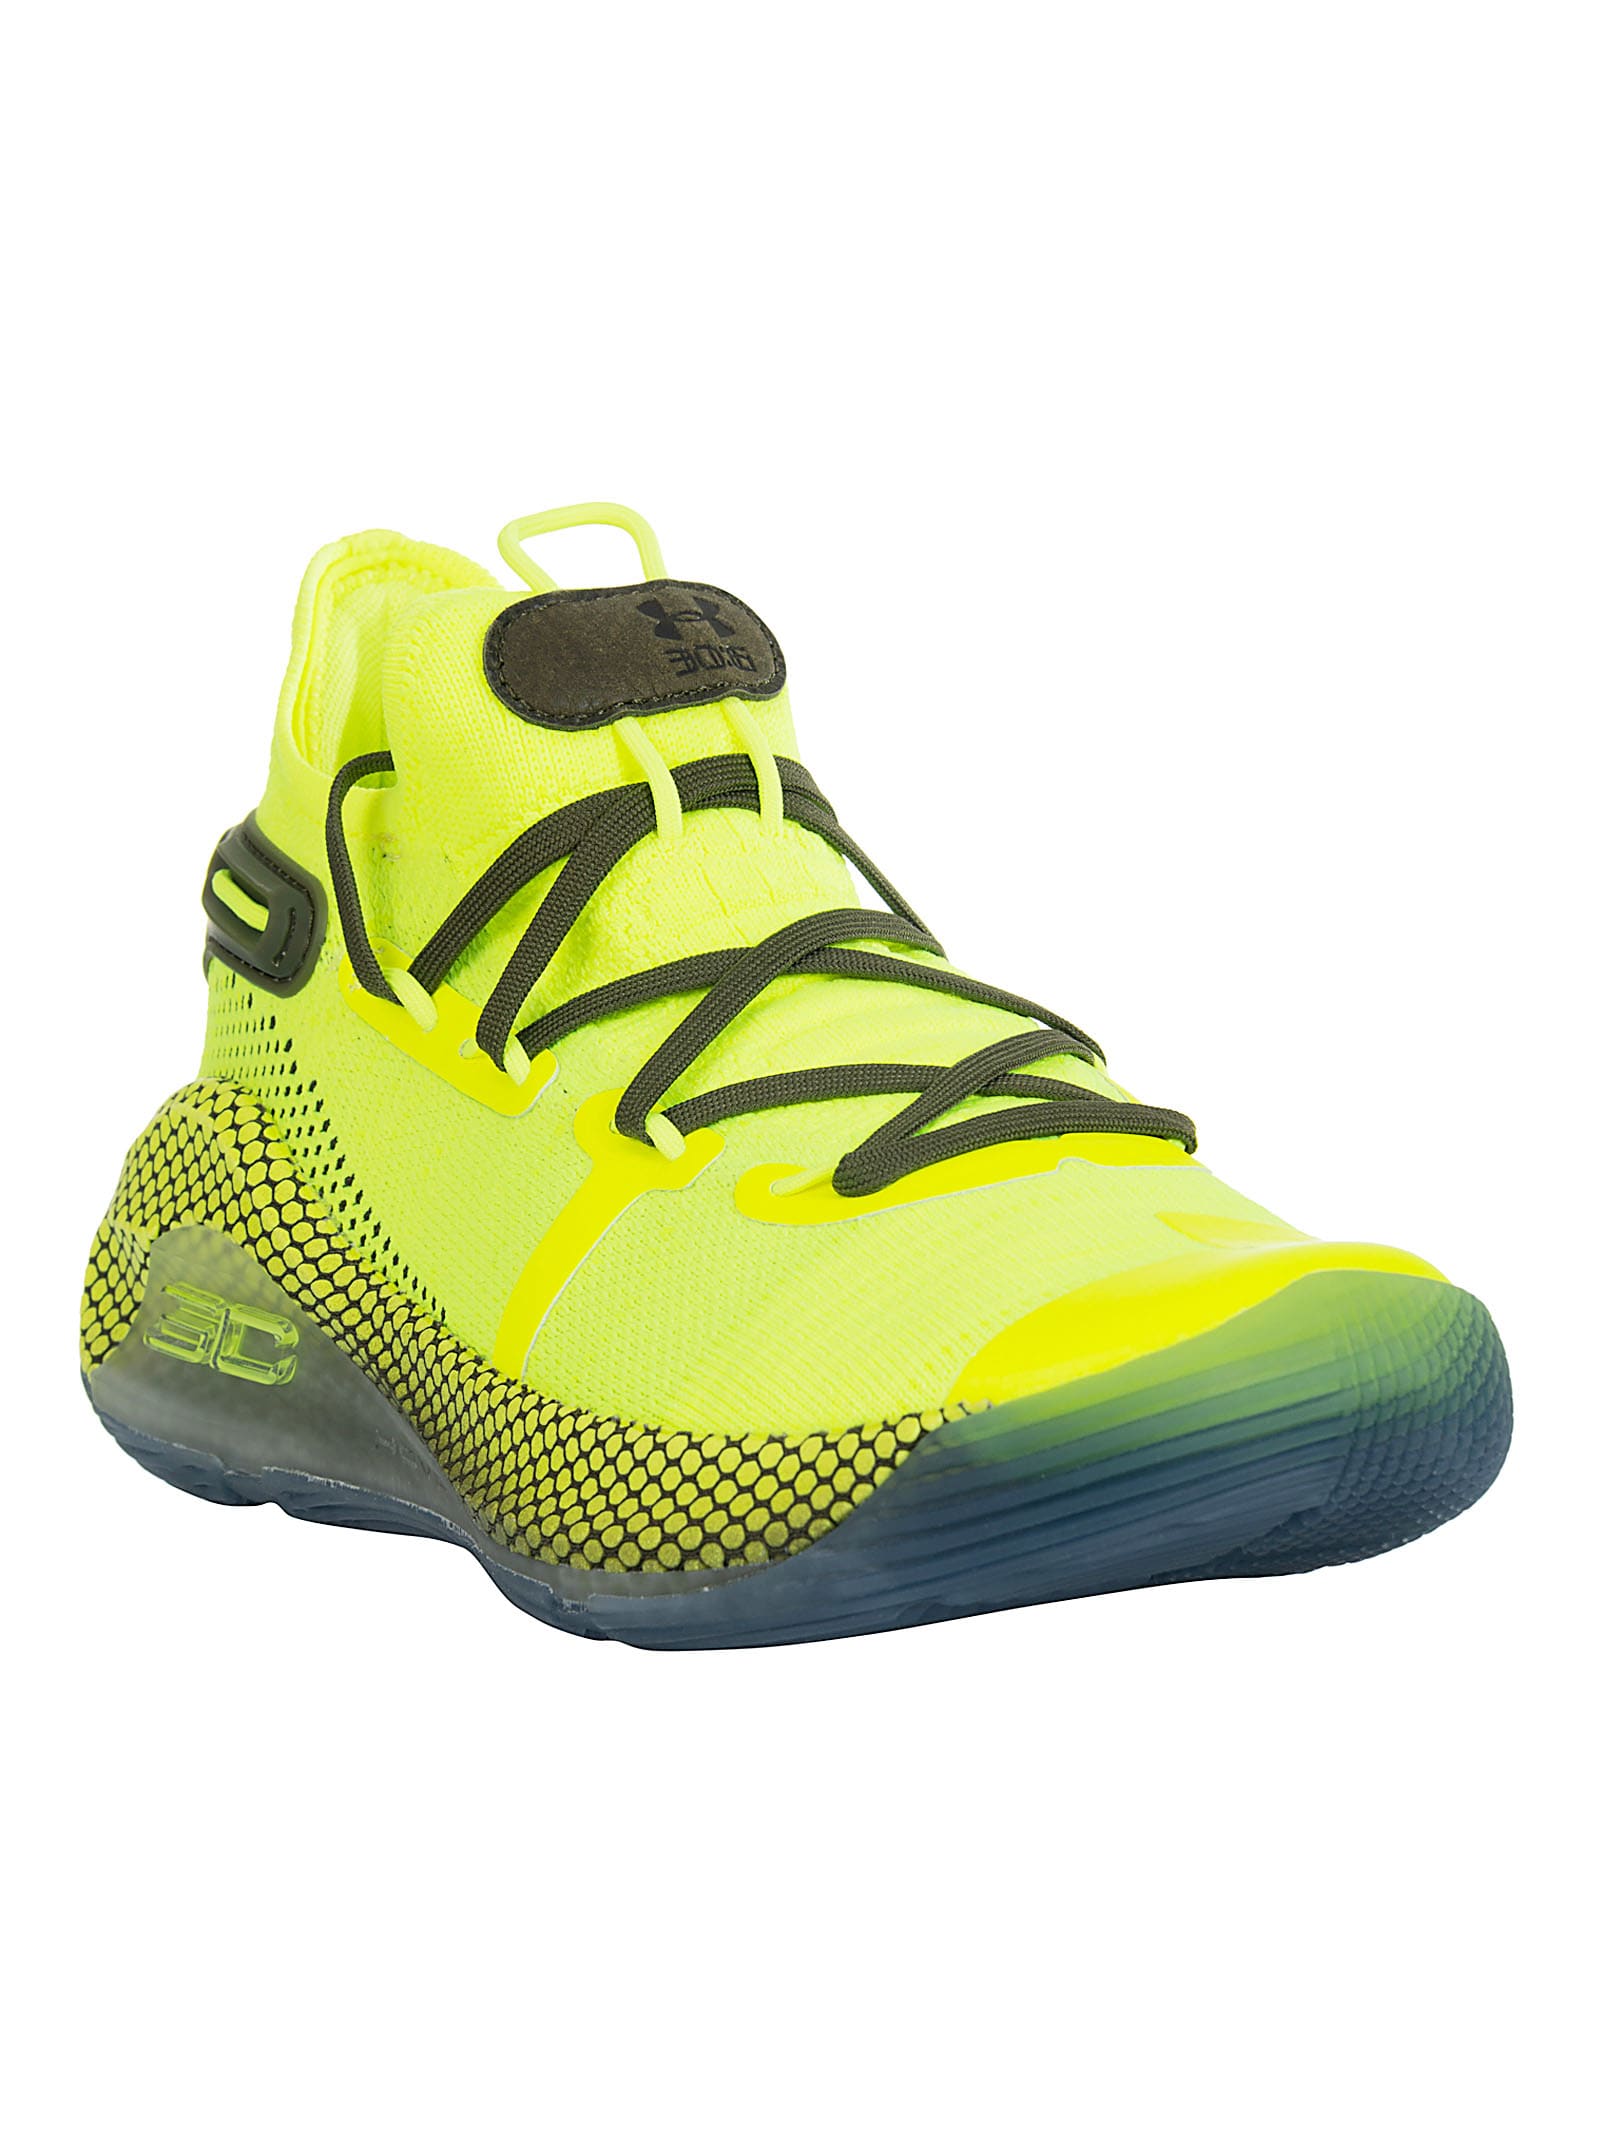 Under Armour Under Armour High-cut Sneakers - Yellow - 10842799 | italist